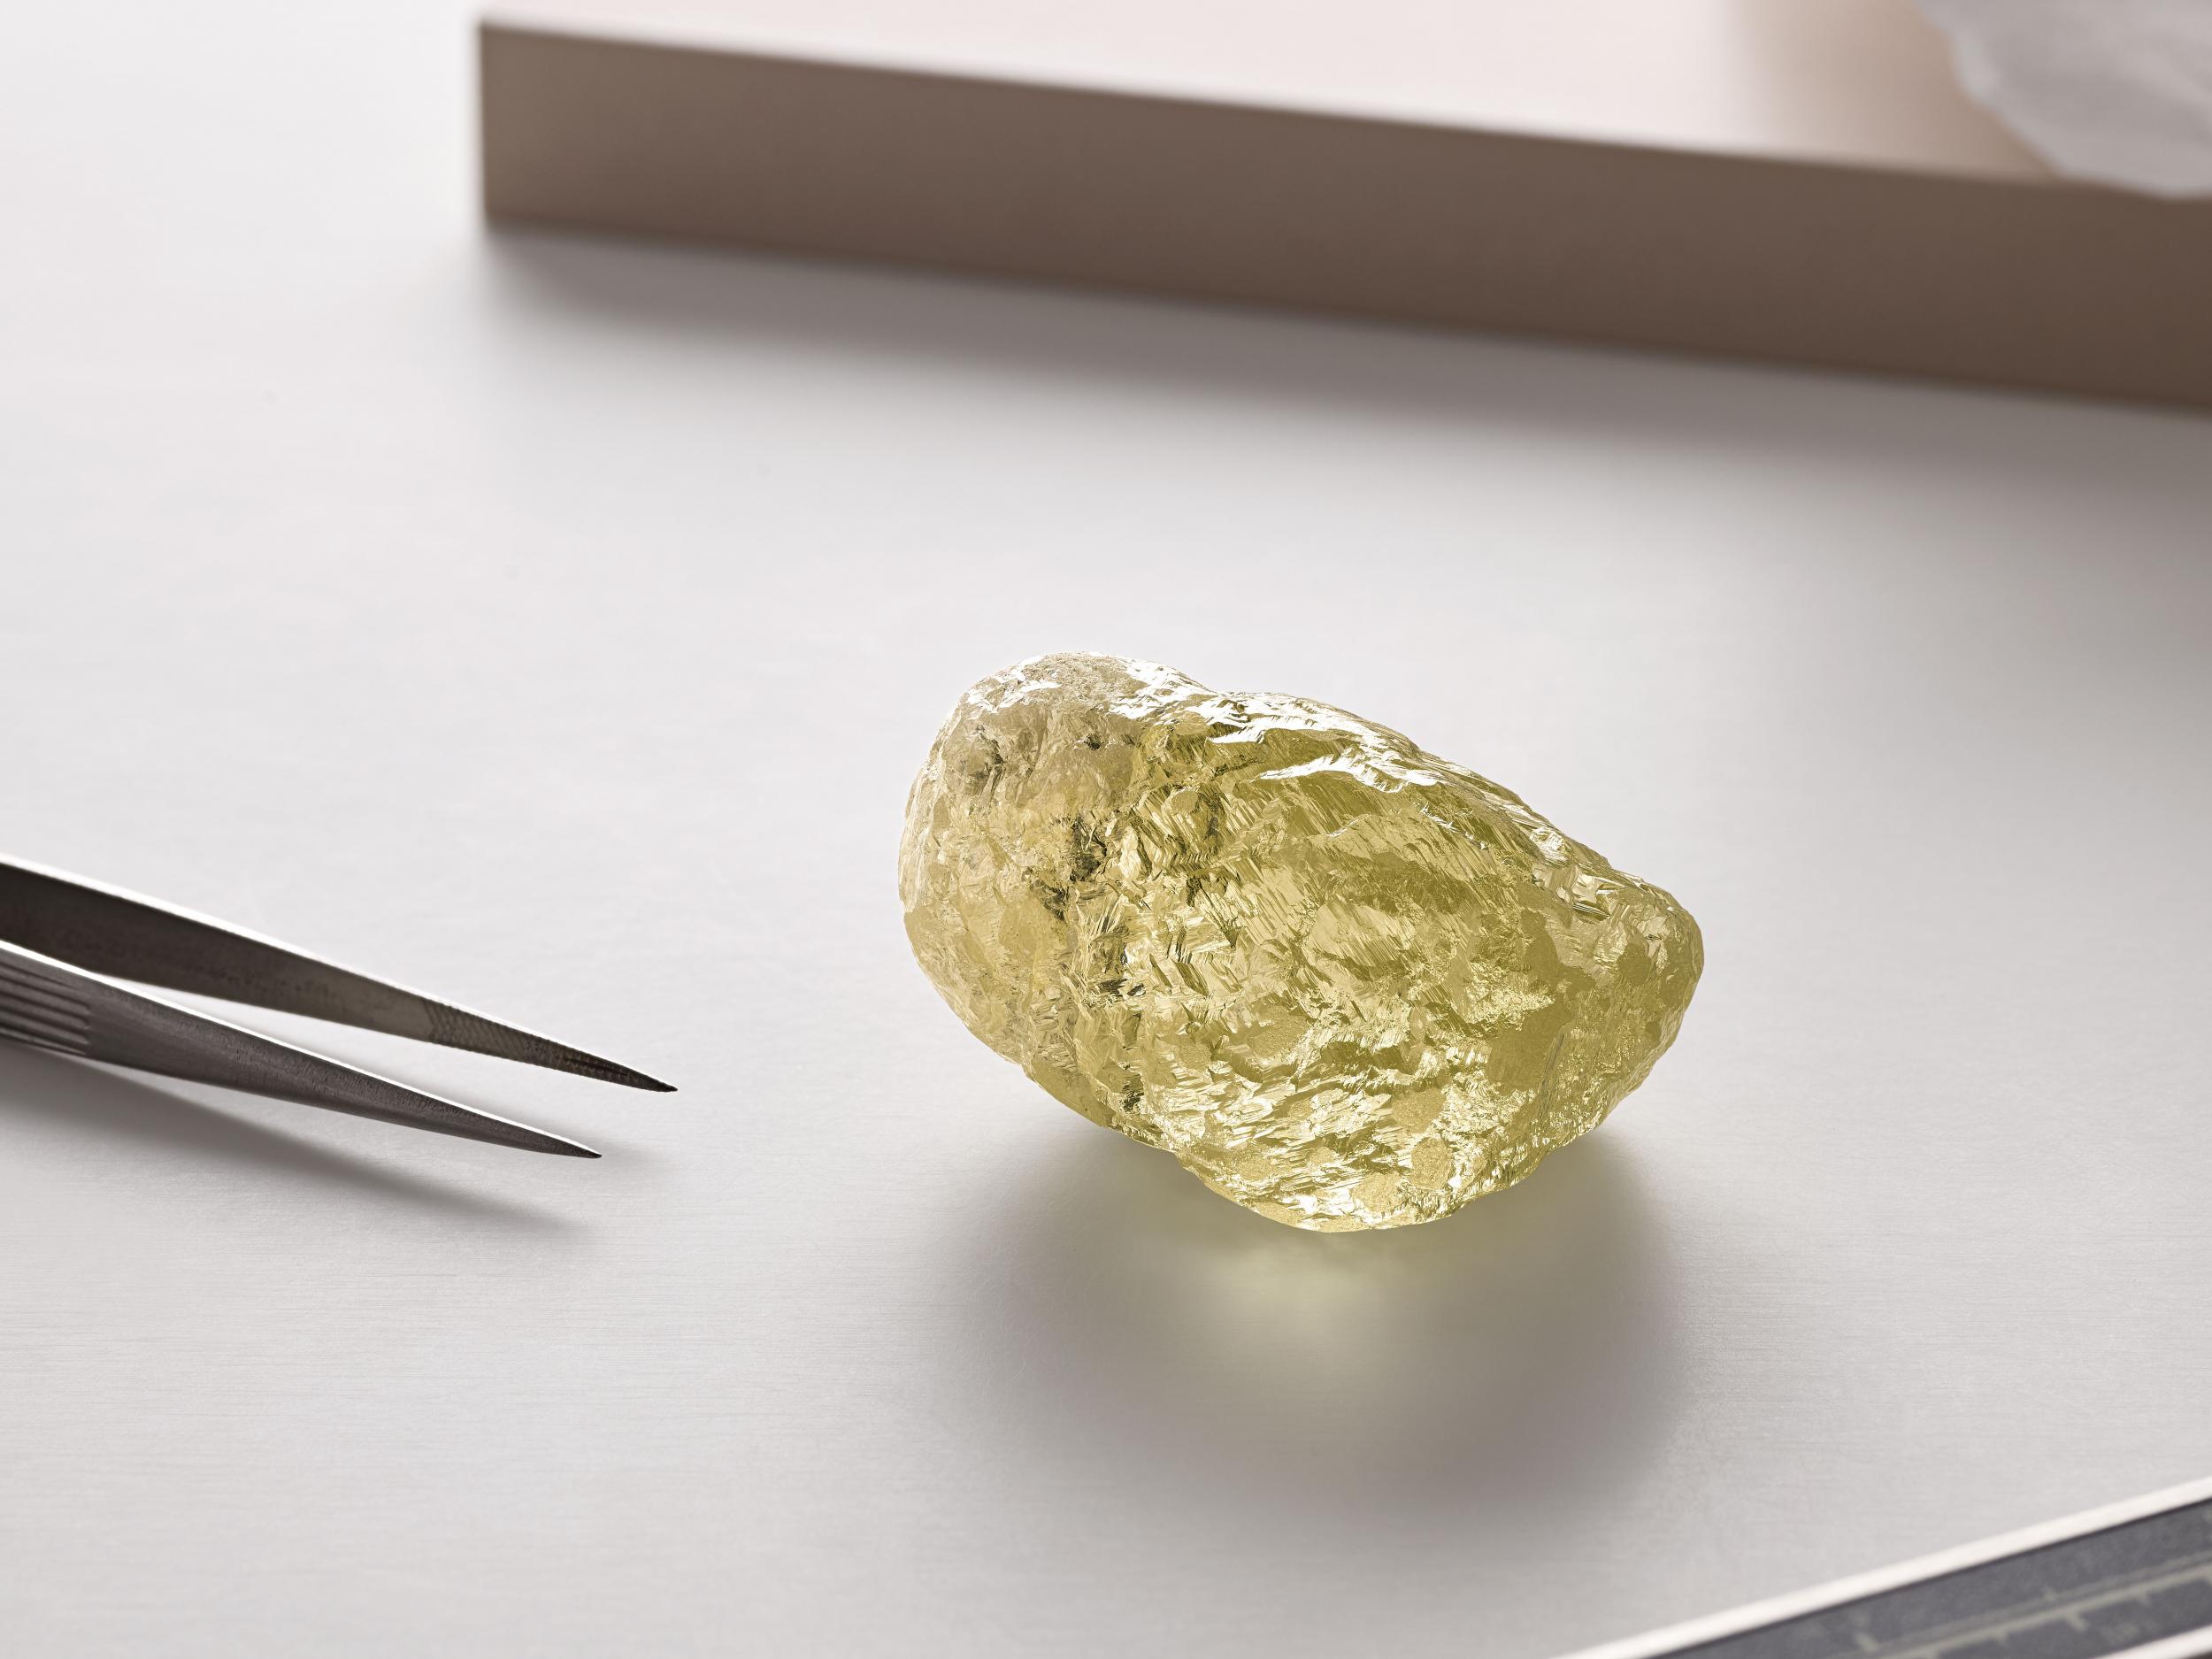 The largest diamond ever found in North America has been unearthed in Canada.